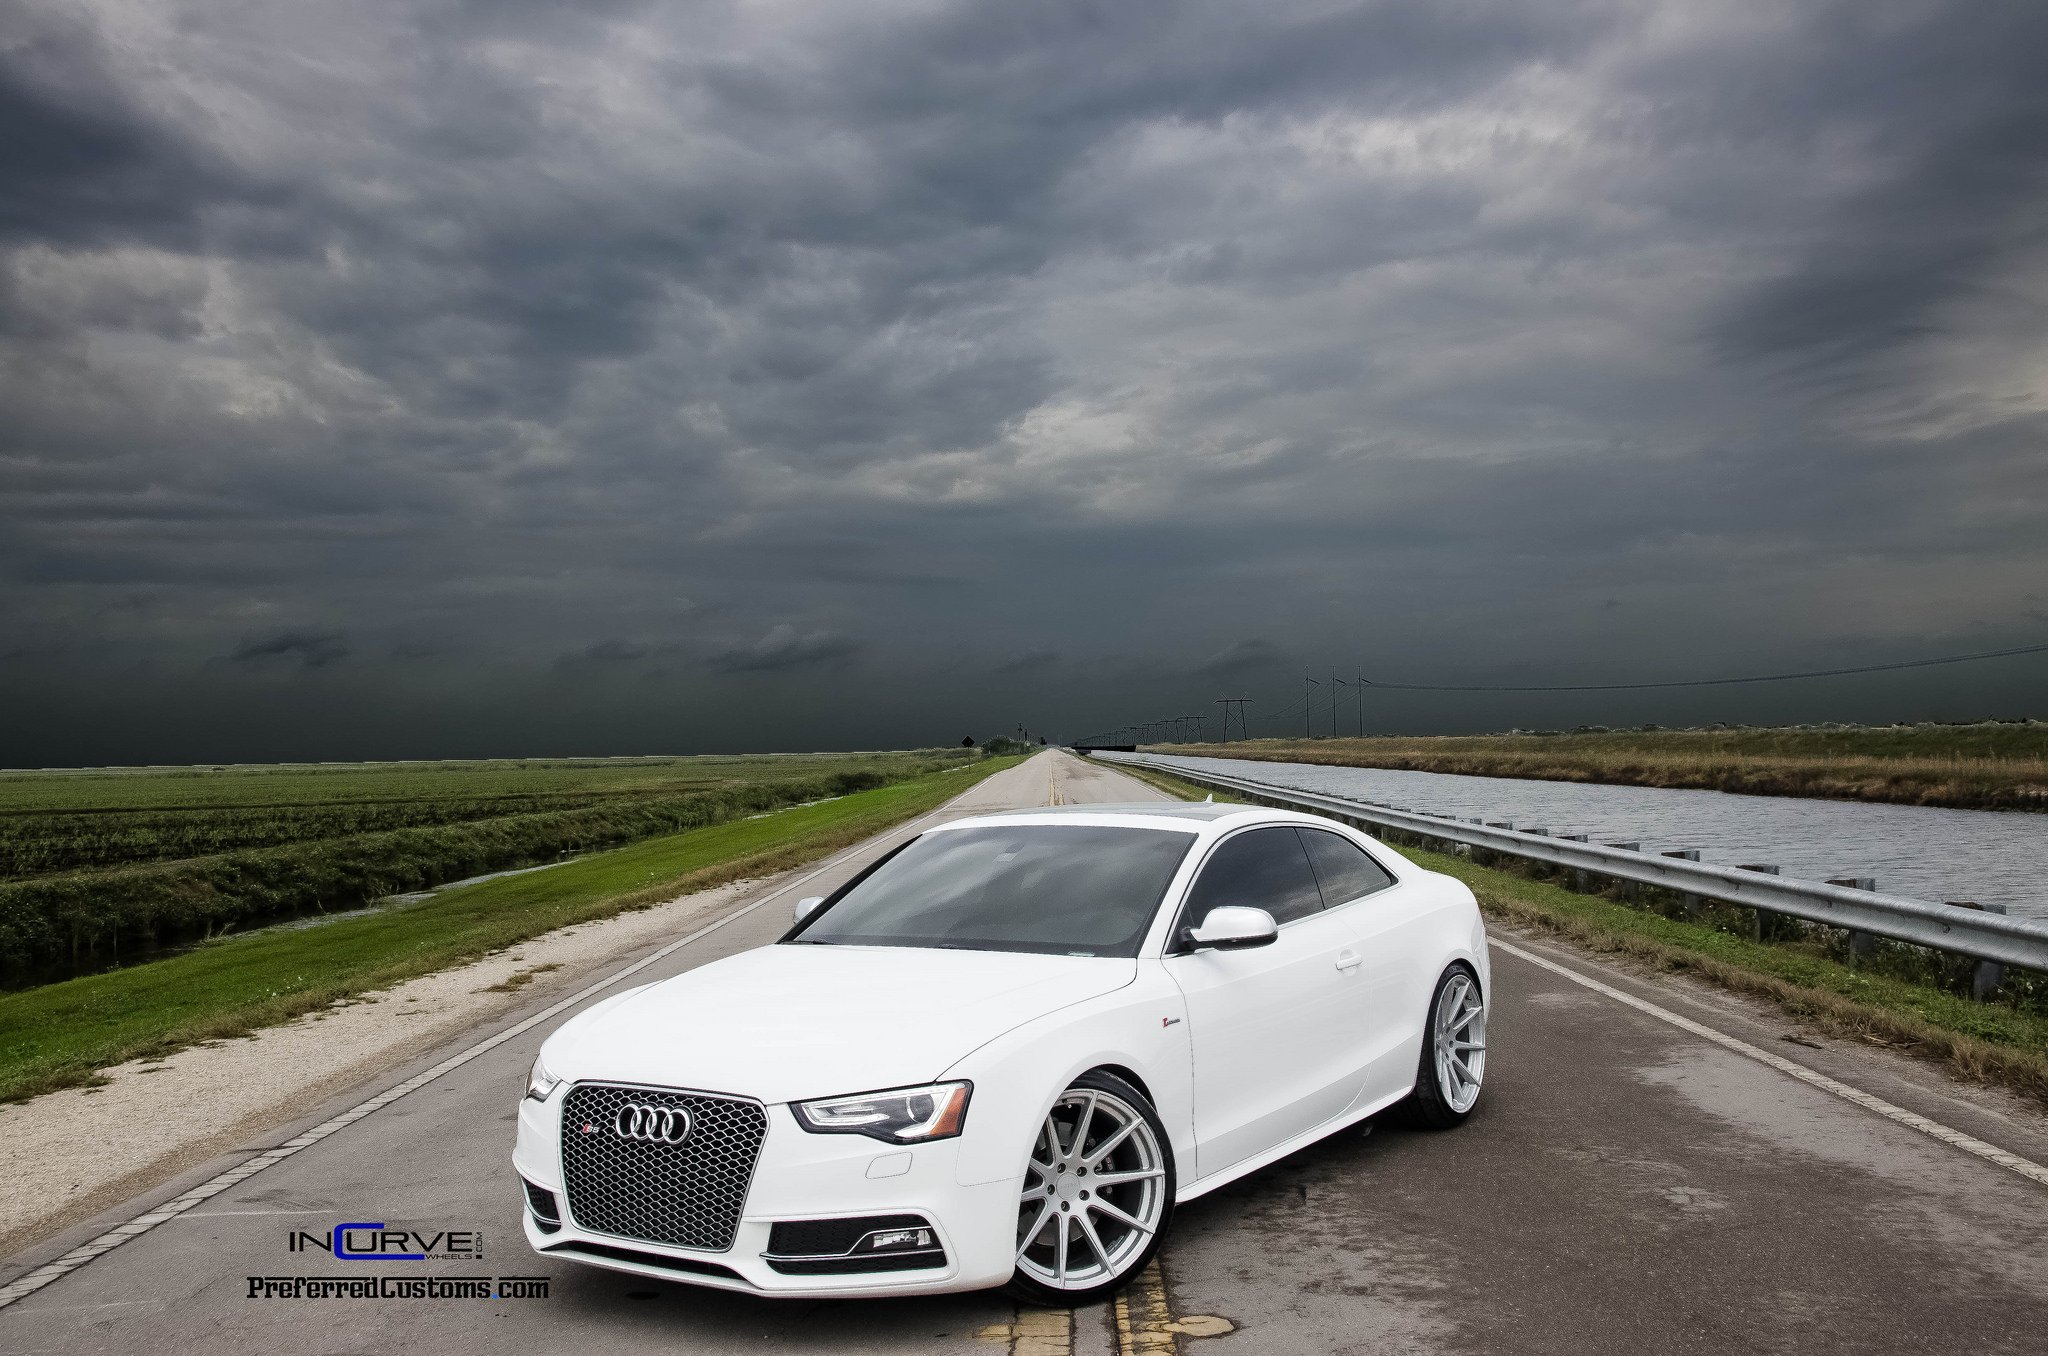 2015, Incurve, Wheels, Cars, Tuning, Audi, S, 5, Coupe Wallpaper